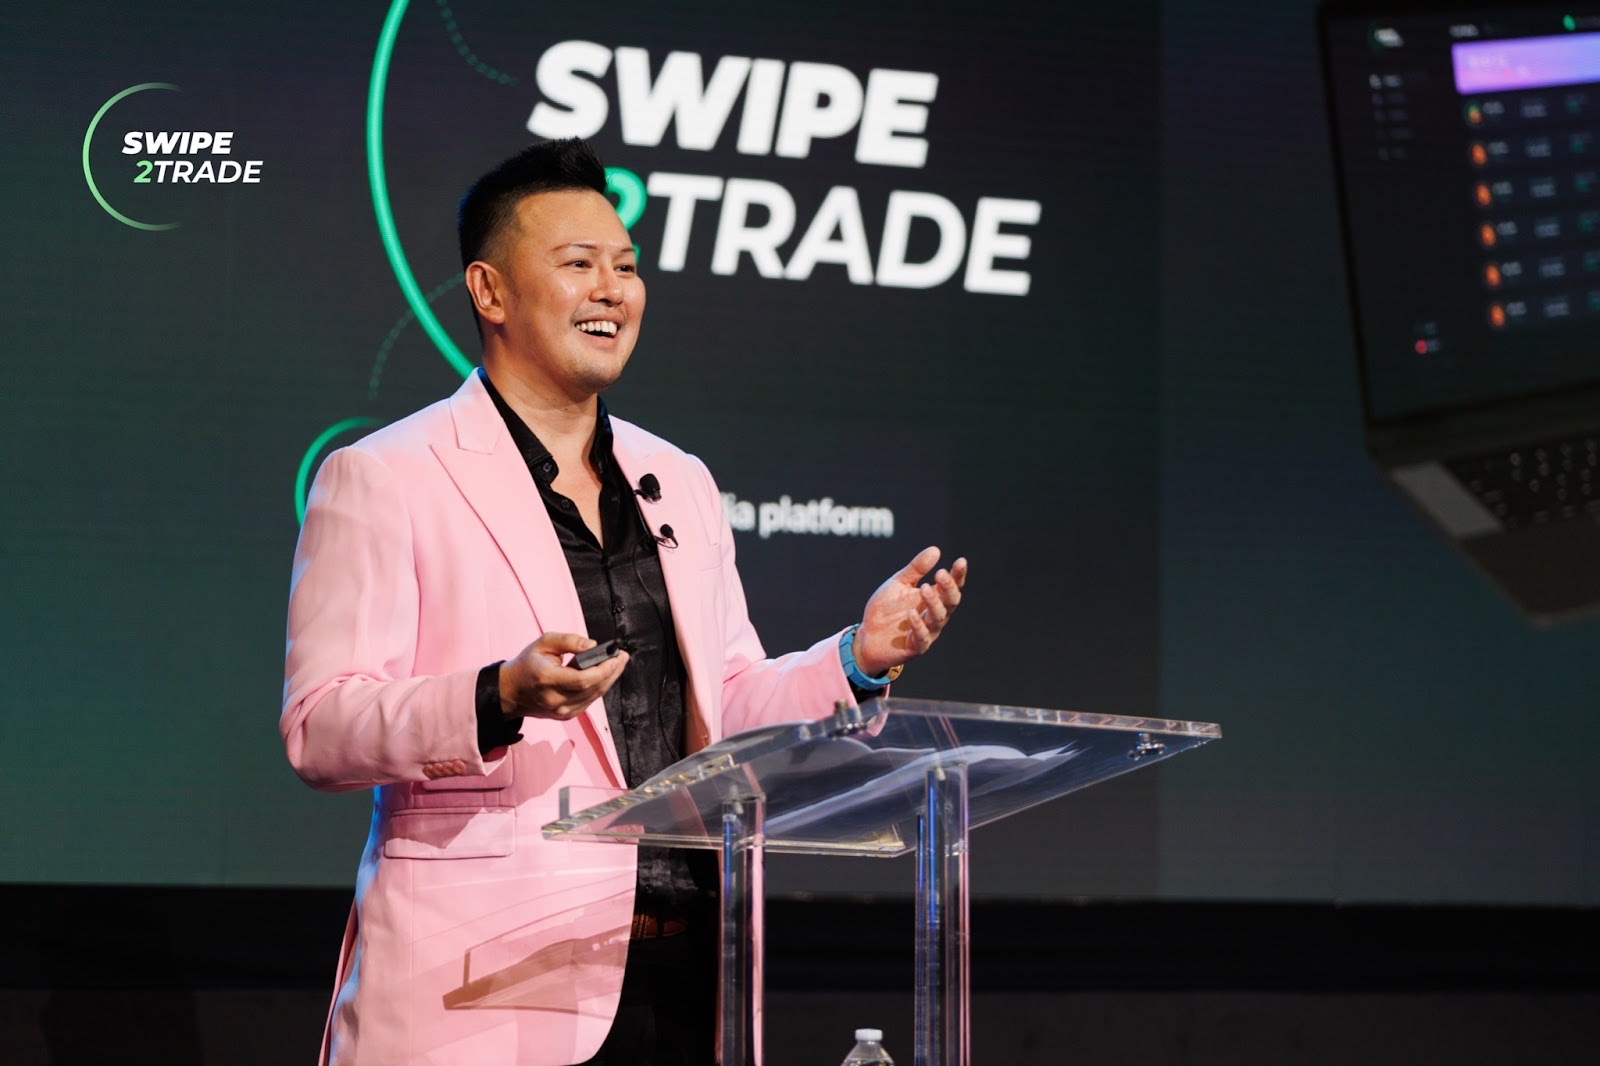 Herbert ‘The Bitcoin Man’ Sim, CEO of Swipe2Trade, was in Austin, Texas to showcase the platform and present it to the media.